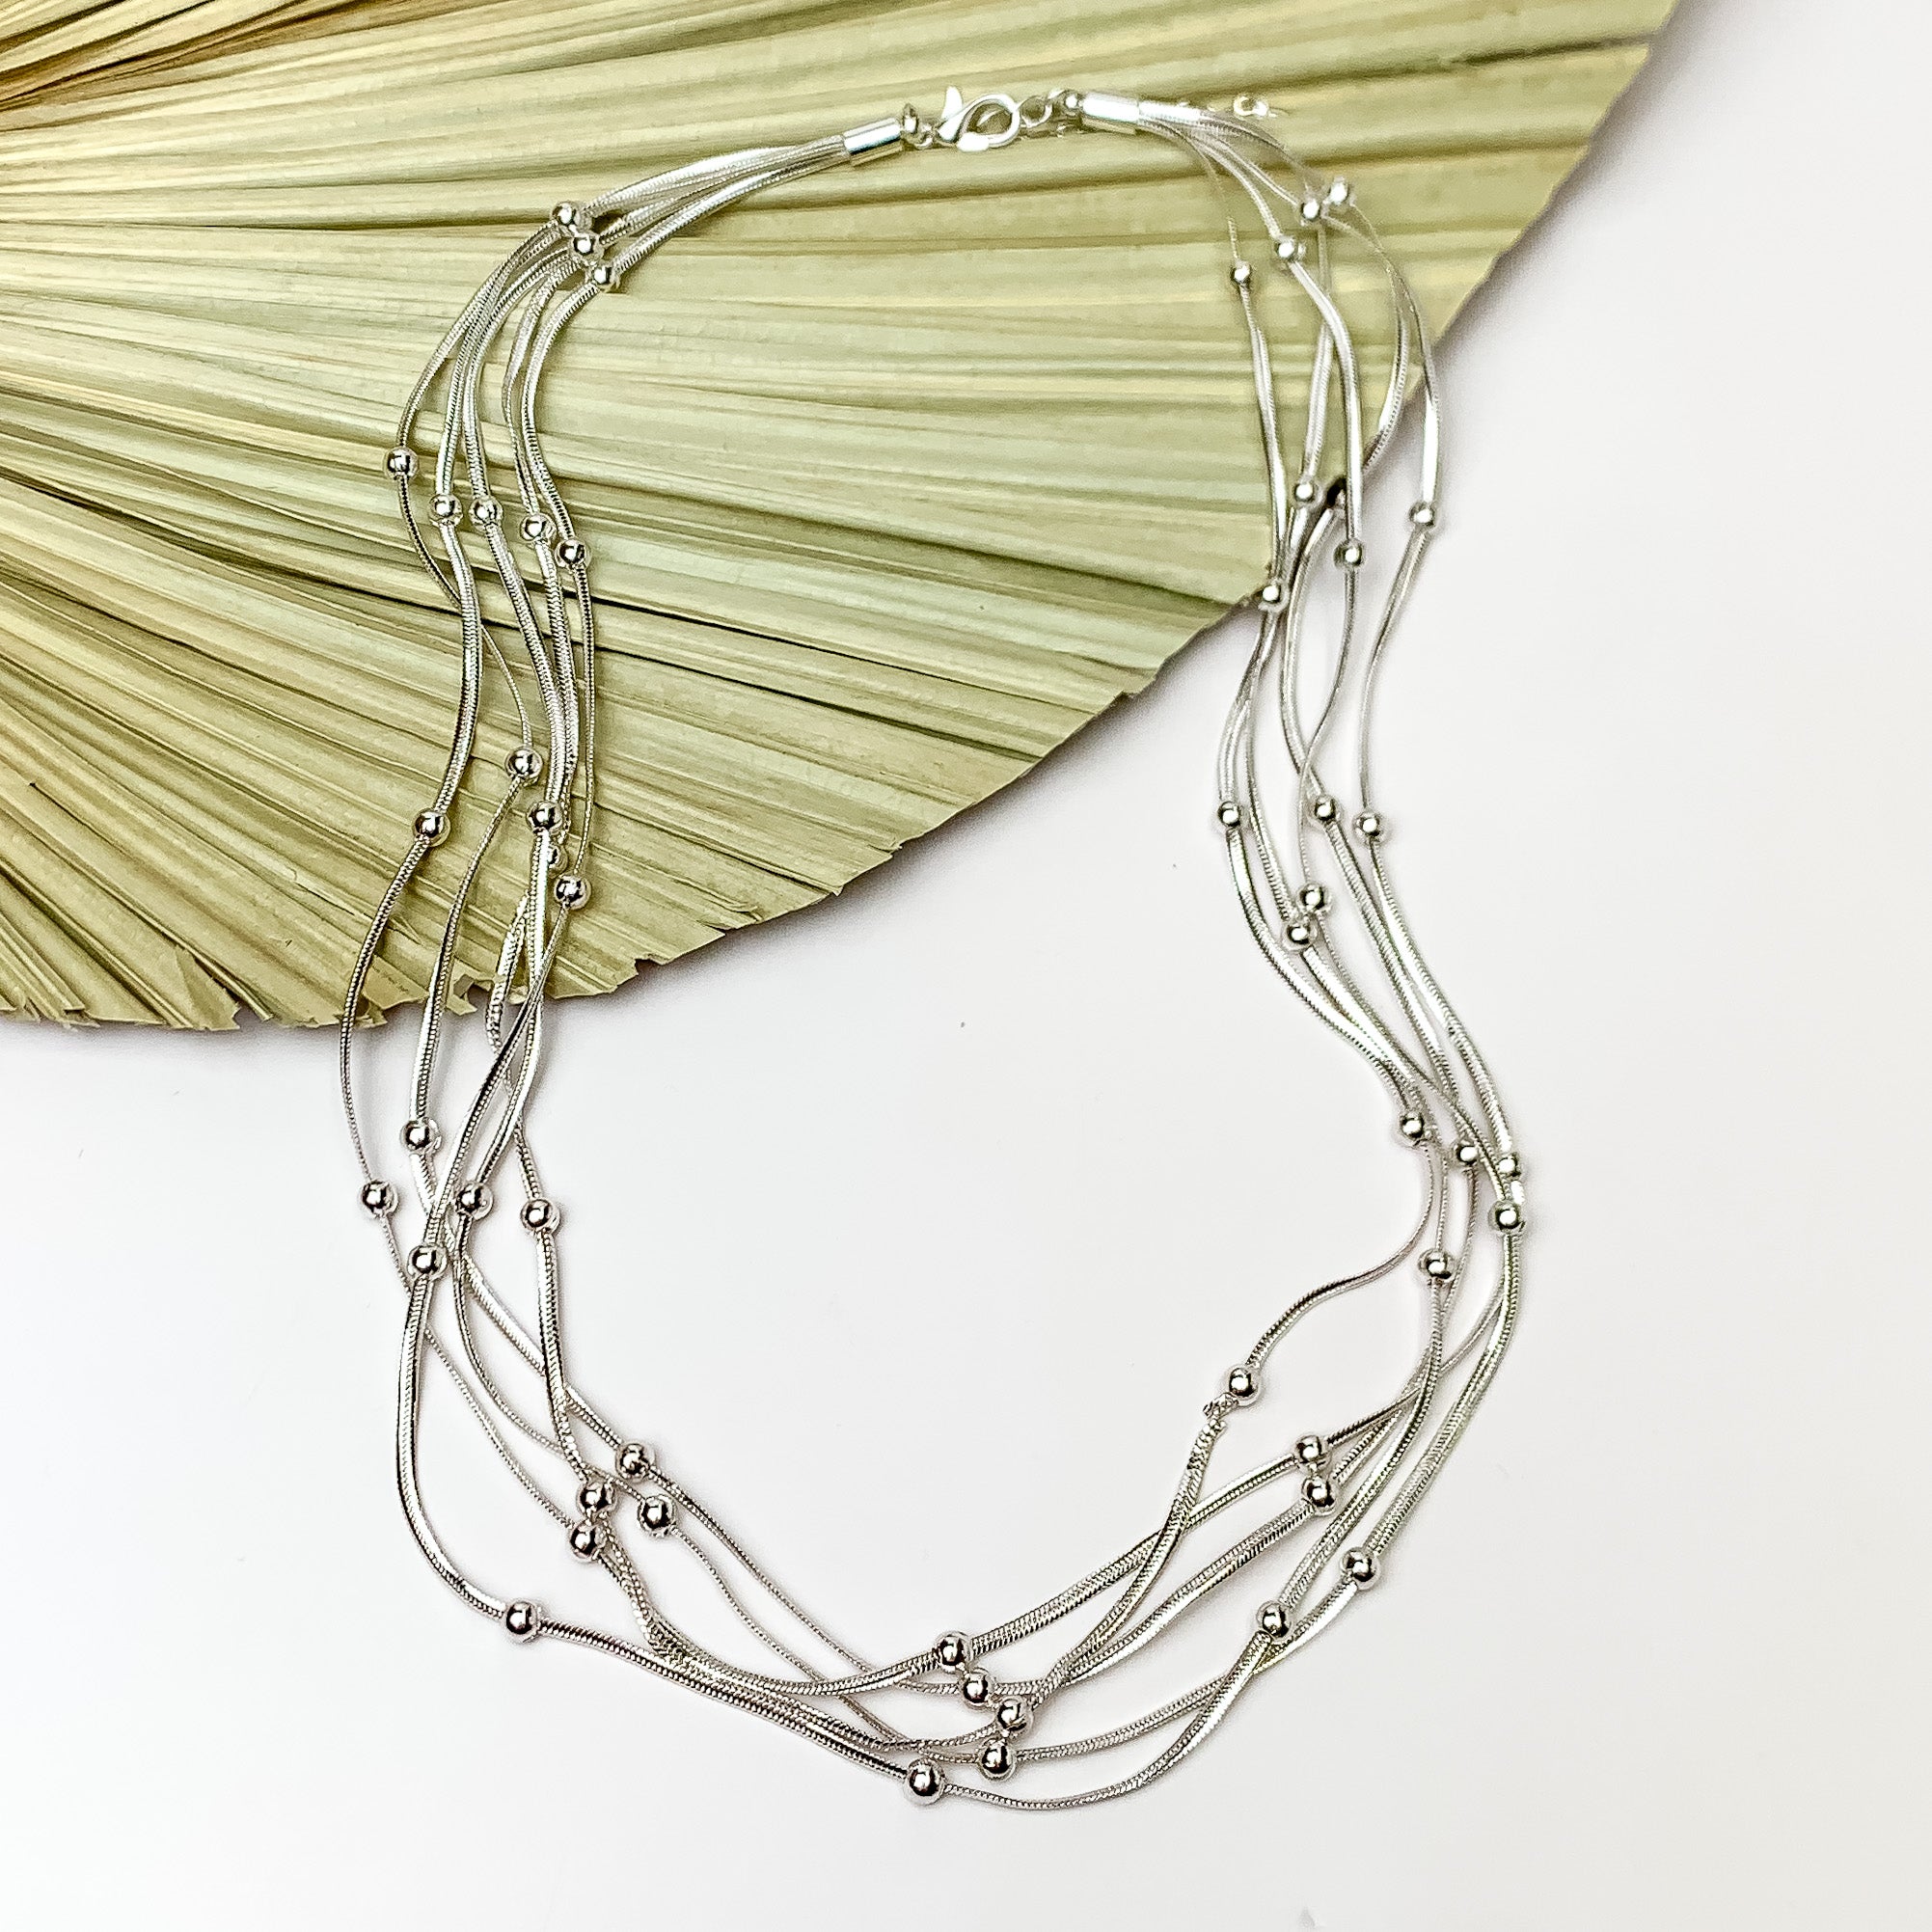 Silver Tone Layered Necklace With Circle Charms. Pictured on a white background with the necklace laying on a fan leaf.